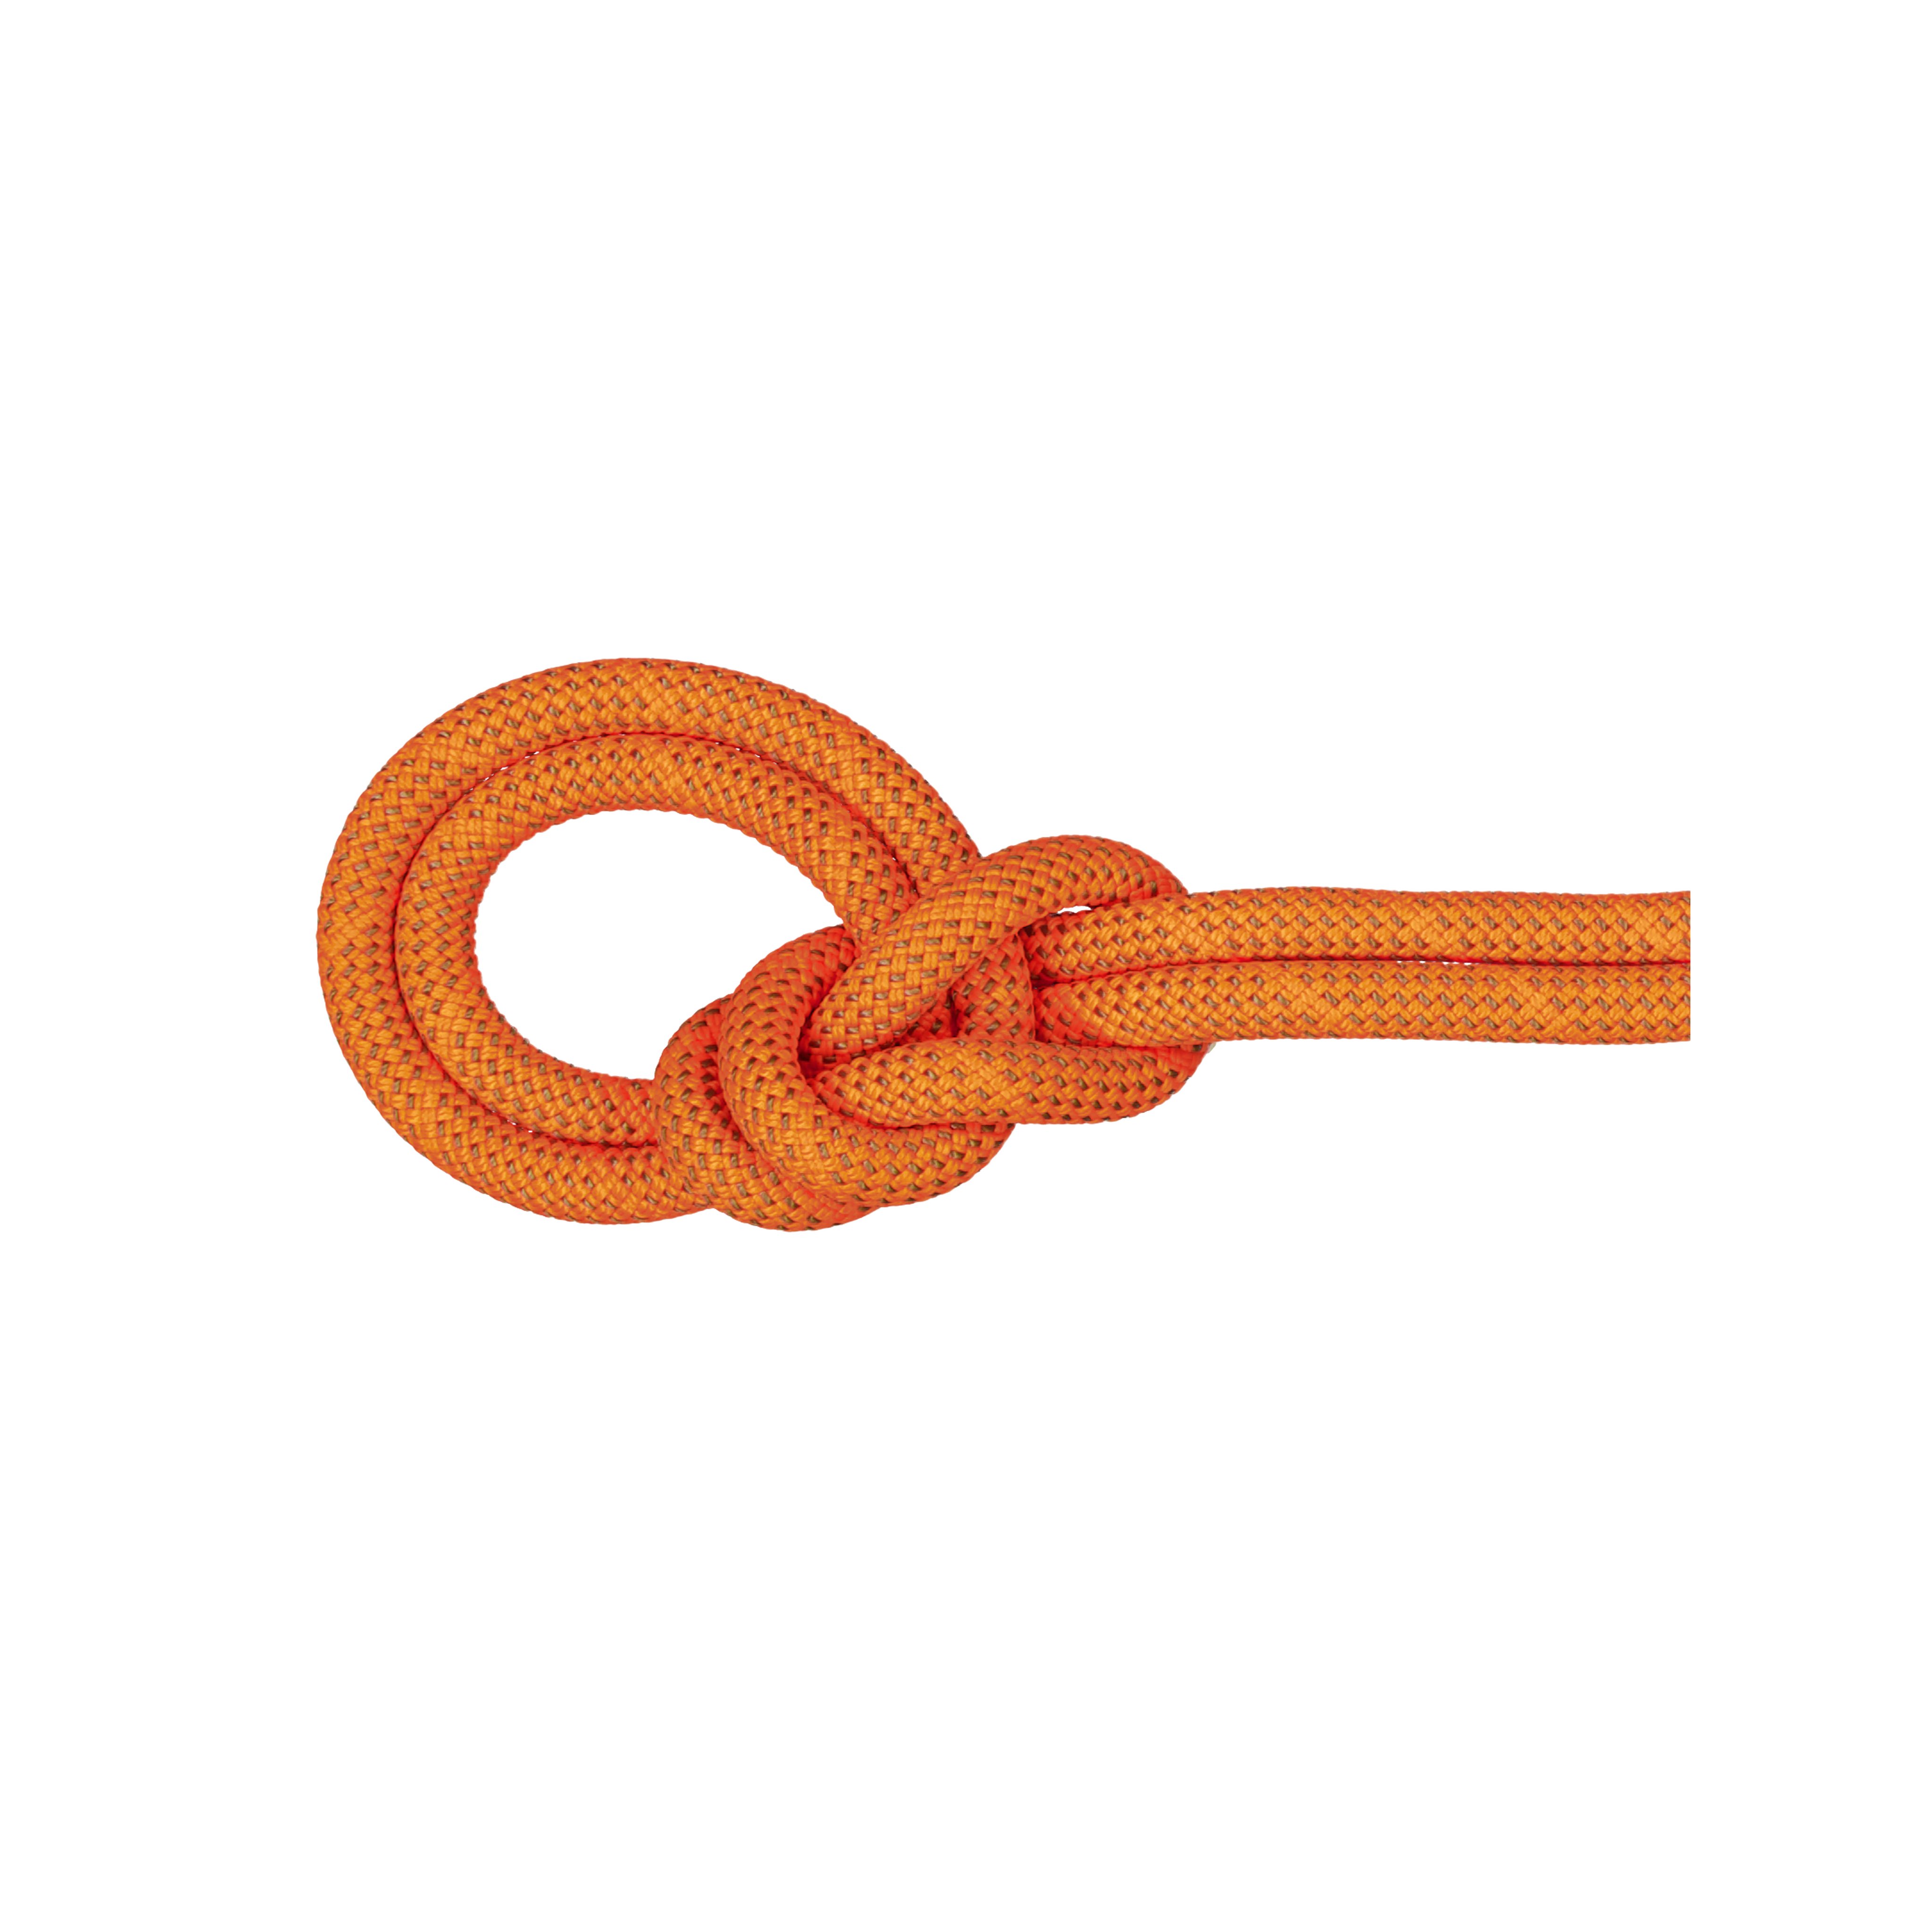 9.8 Crag Dry Rope product image